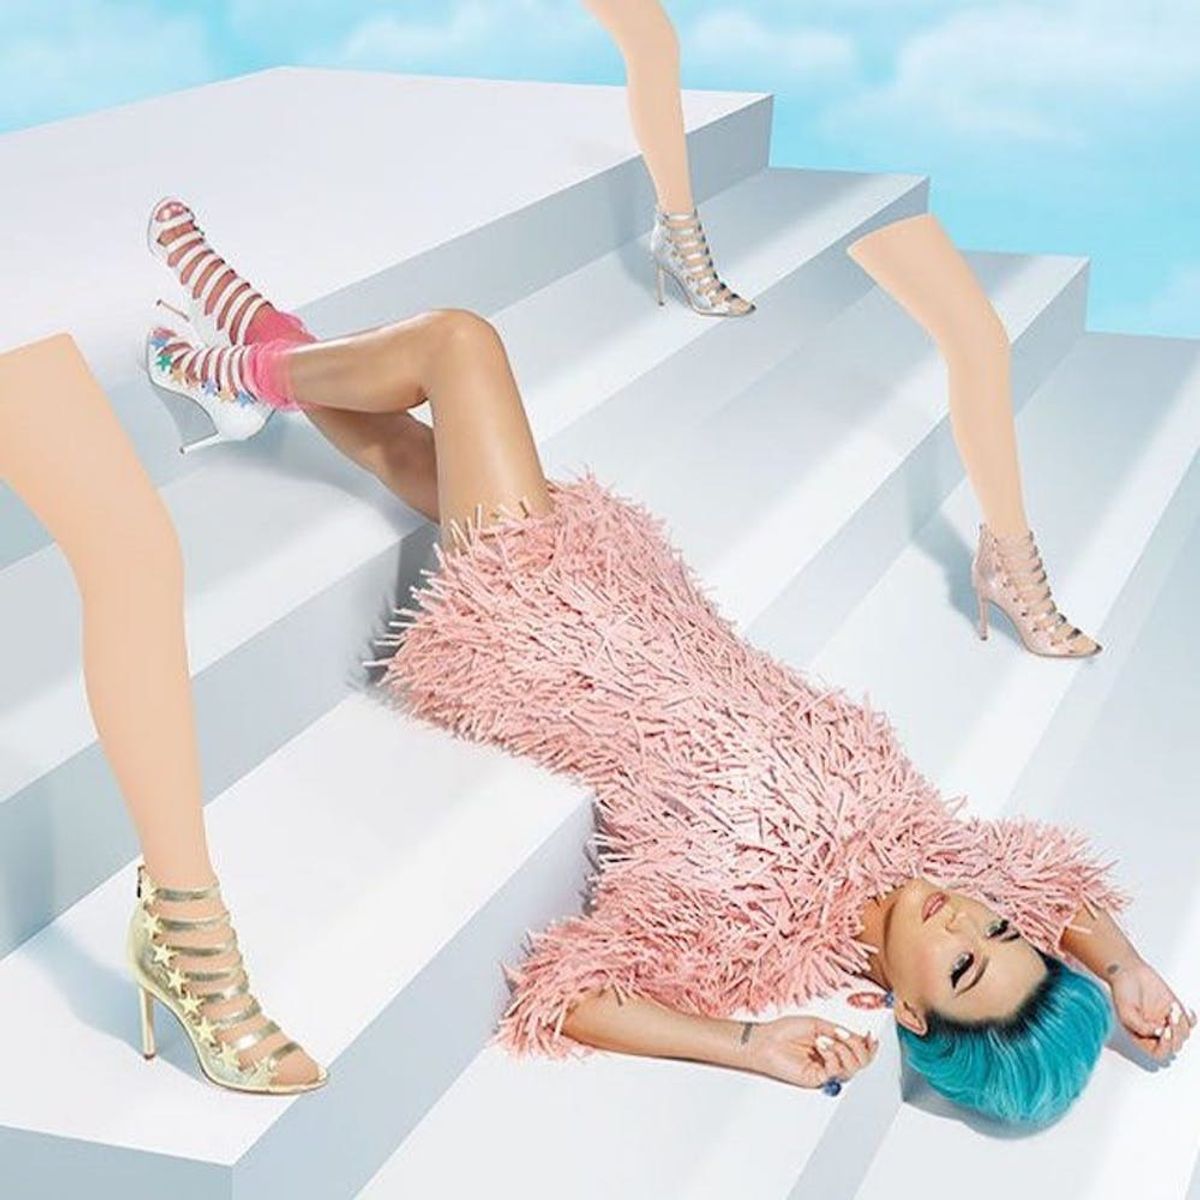 Katy Perry Just Teased New Additions to Her Shoe Line